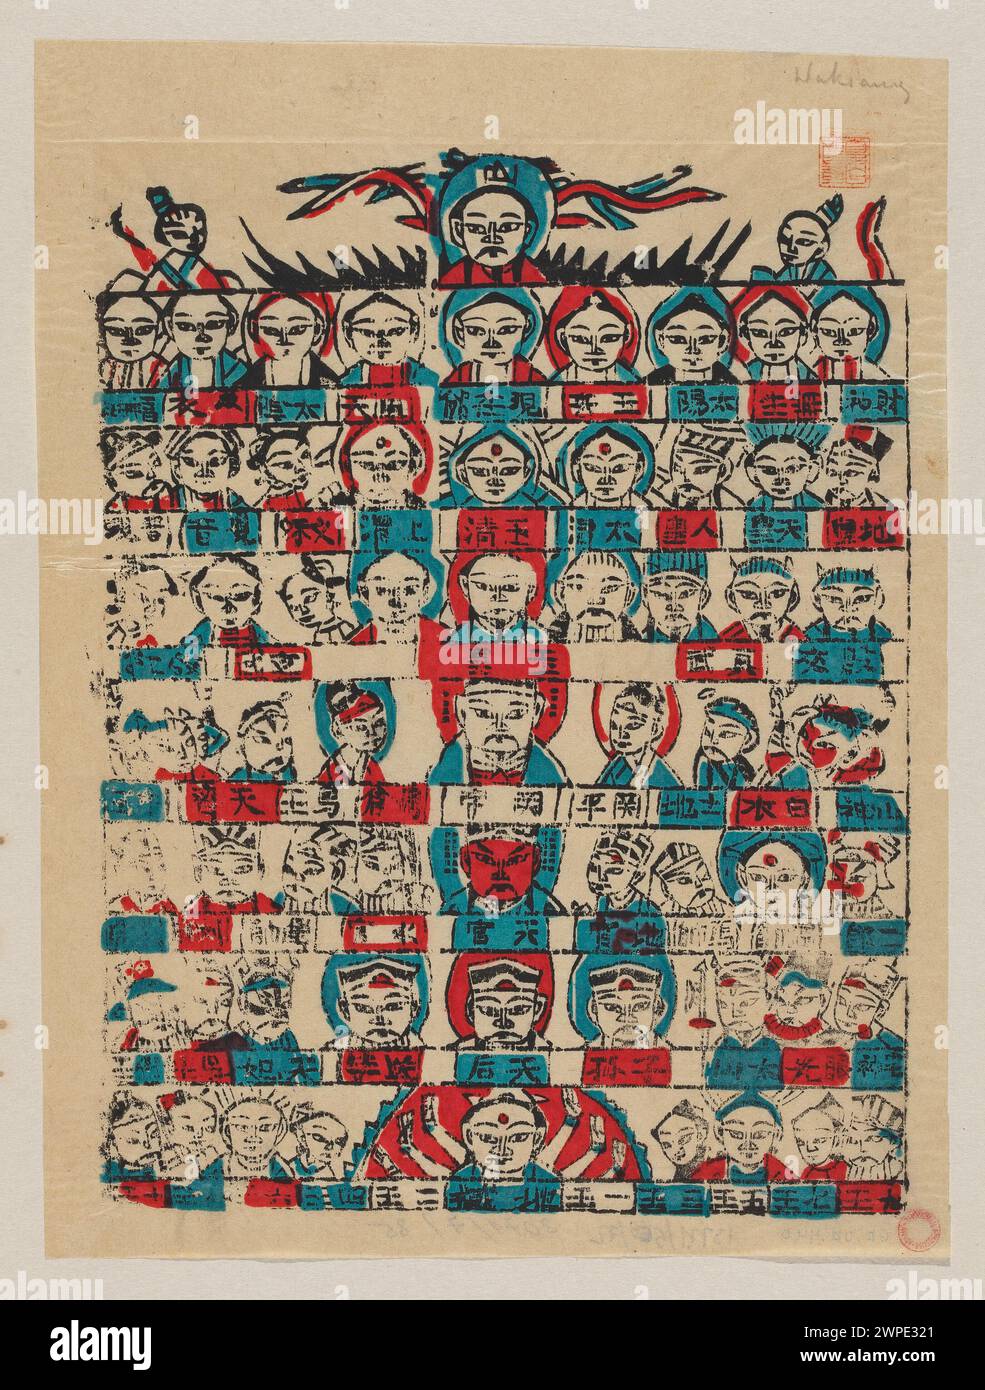 Pantheon of deities;  beginning of the 20th century (1901-00-00-1932-00-00);Jabłoński, Witold (1901-1957) - collection, gift (provenance), Chinese art Stock Photo